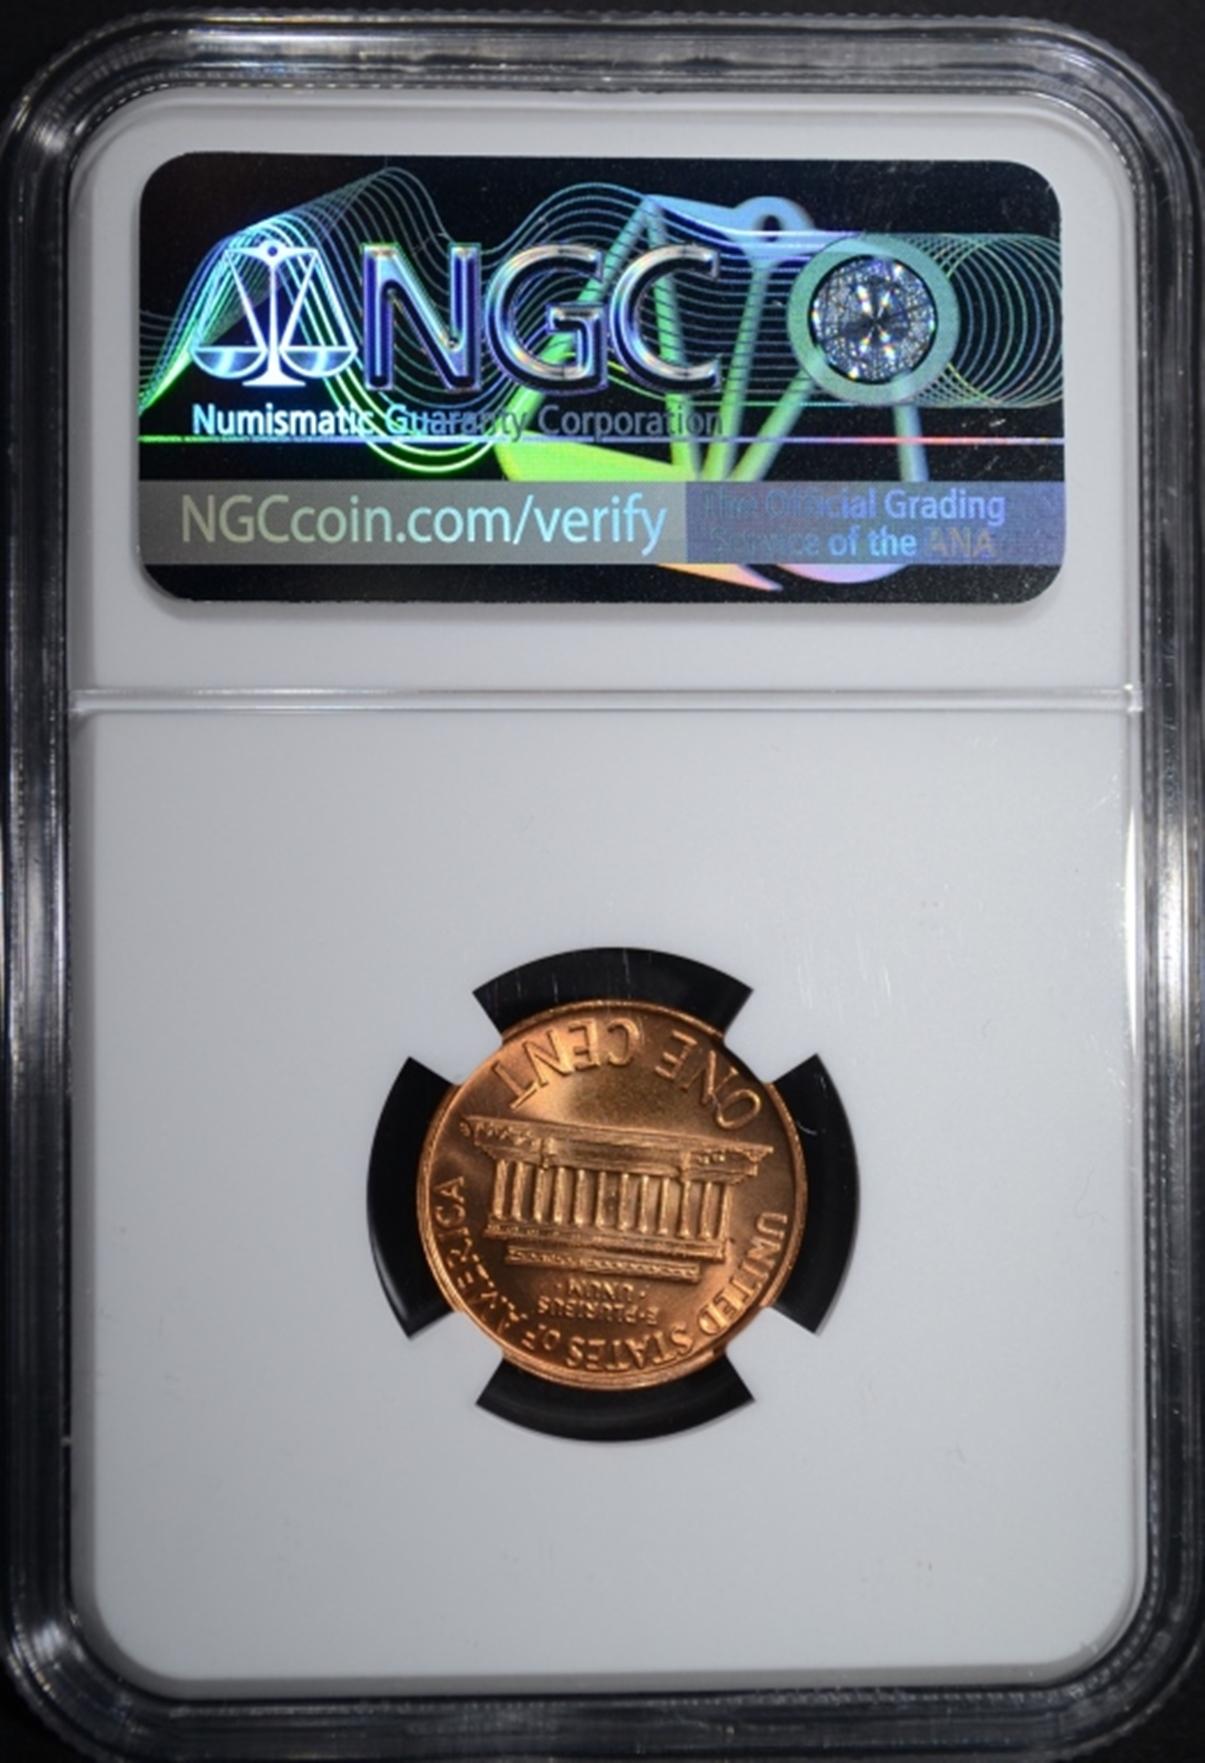 1966 SMS LINCOLN CENT, NGC MS-68 RD